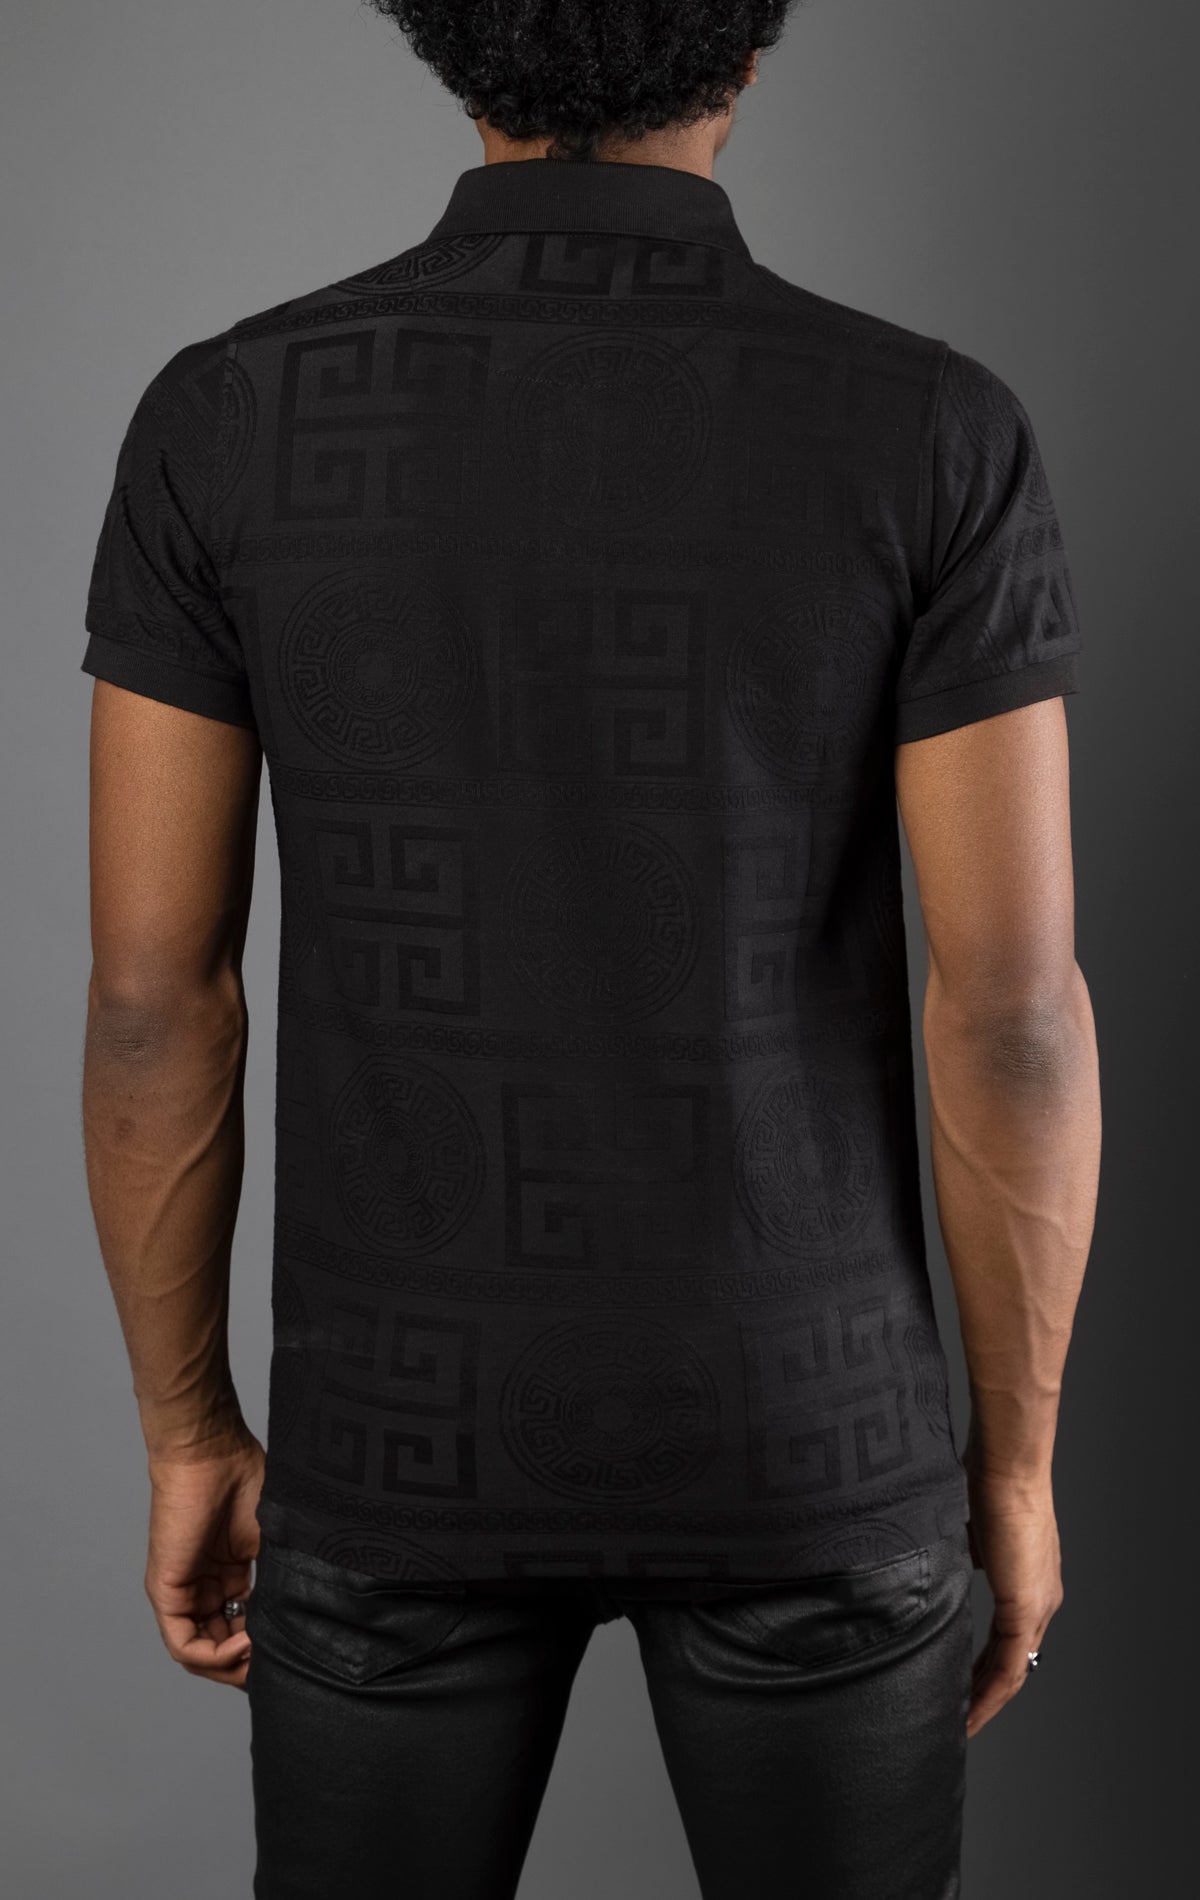 Black Men's regular-fit, short-sleeve polo shirt. The shirt features a seamless Greek pattern and a classic polo design